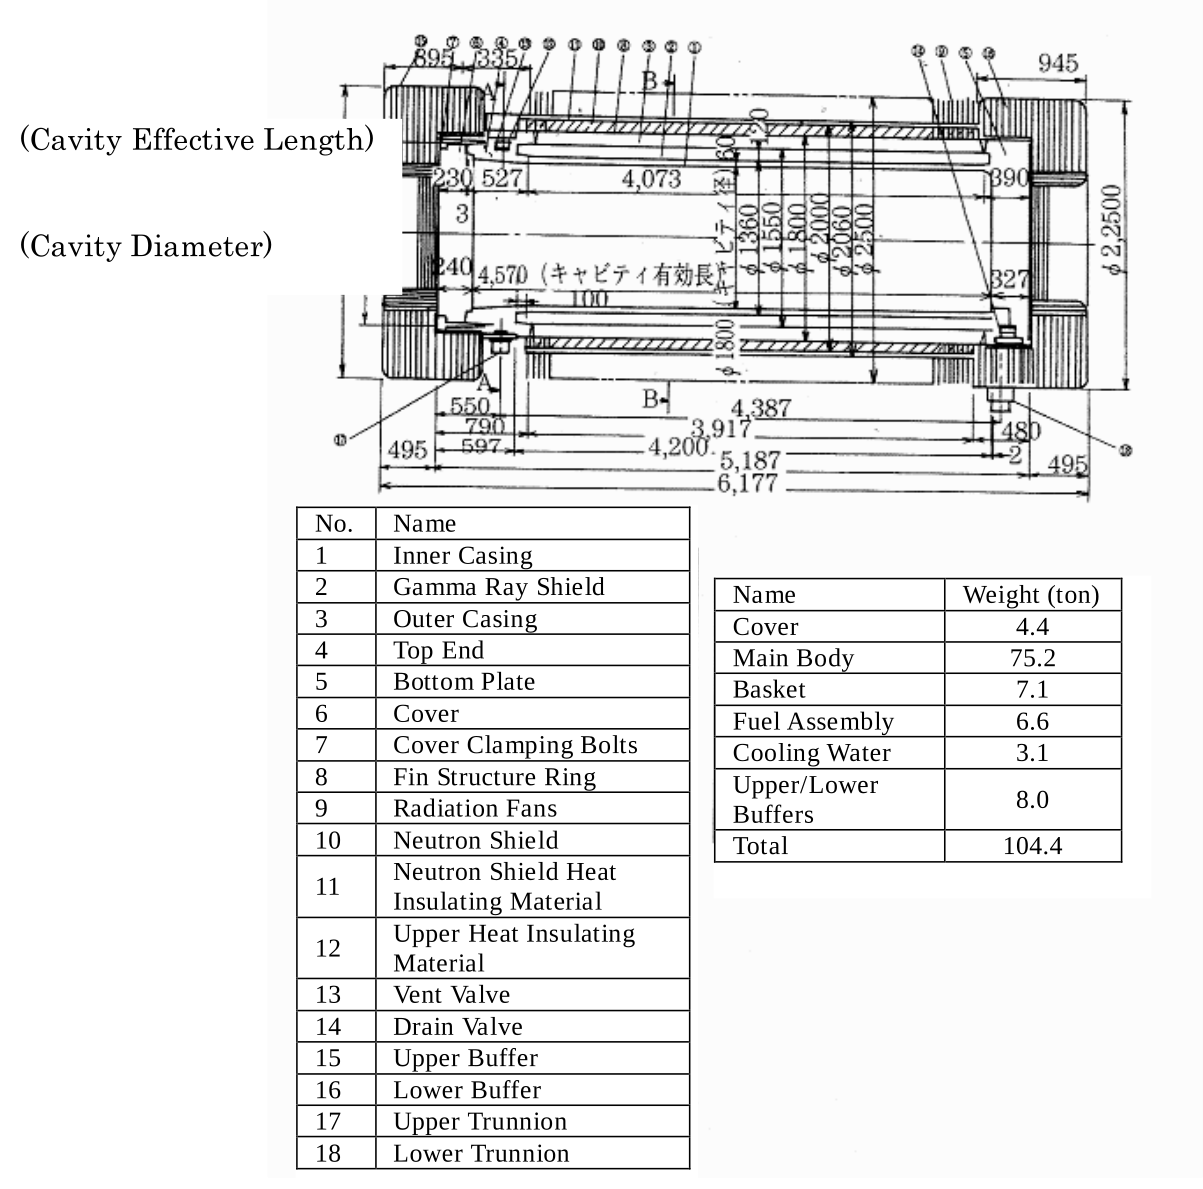 Dimensions of the used nuclear fuel transport container